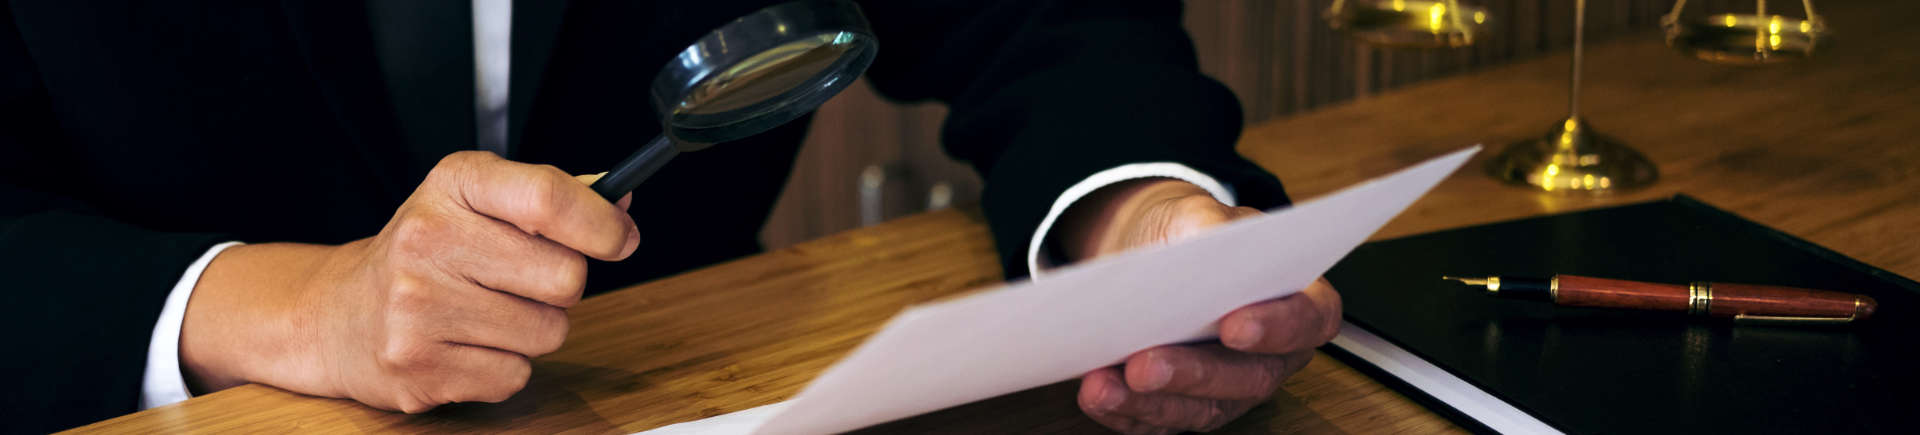 attorney at the desk in his office checking a document with a magnifying glass